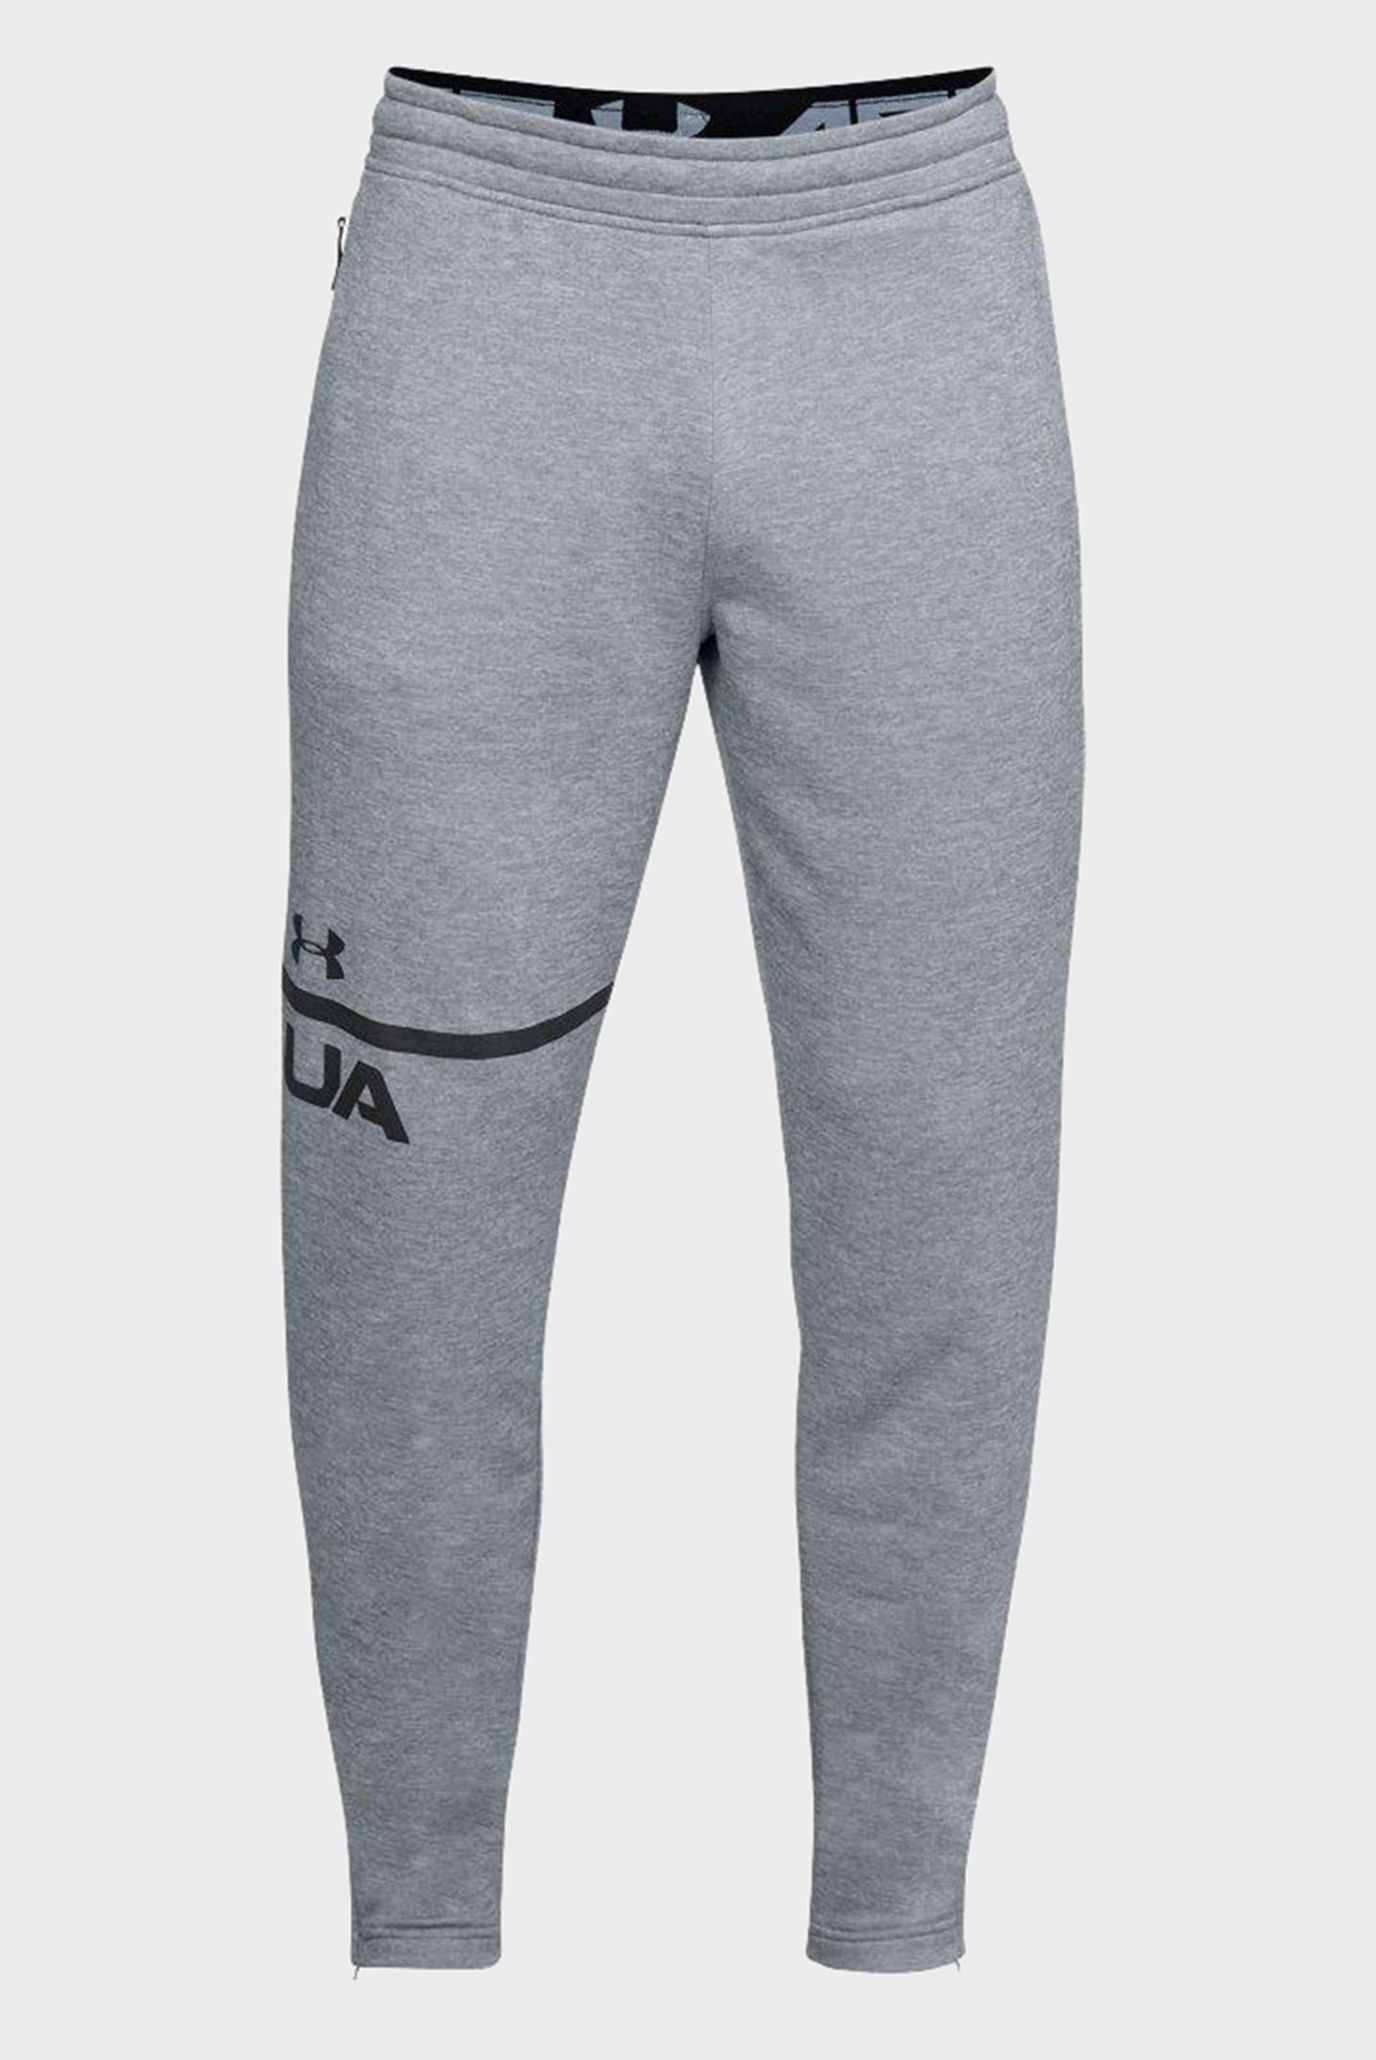 MK1 Terry Tapered Pant Under Armour 